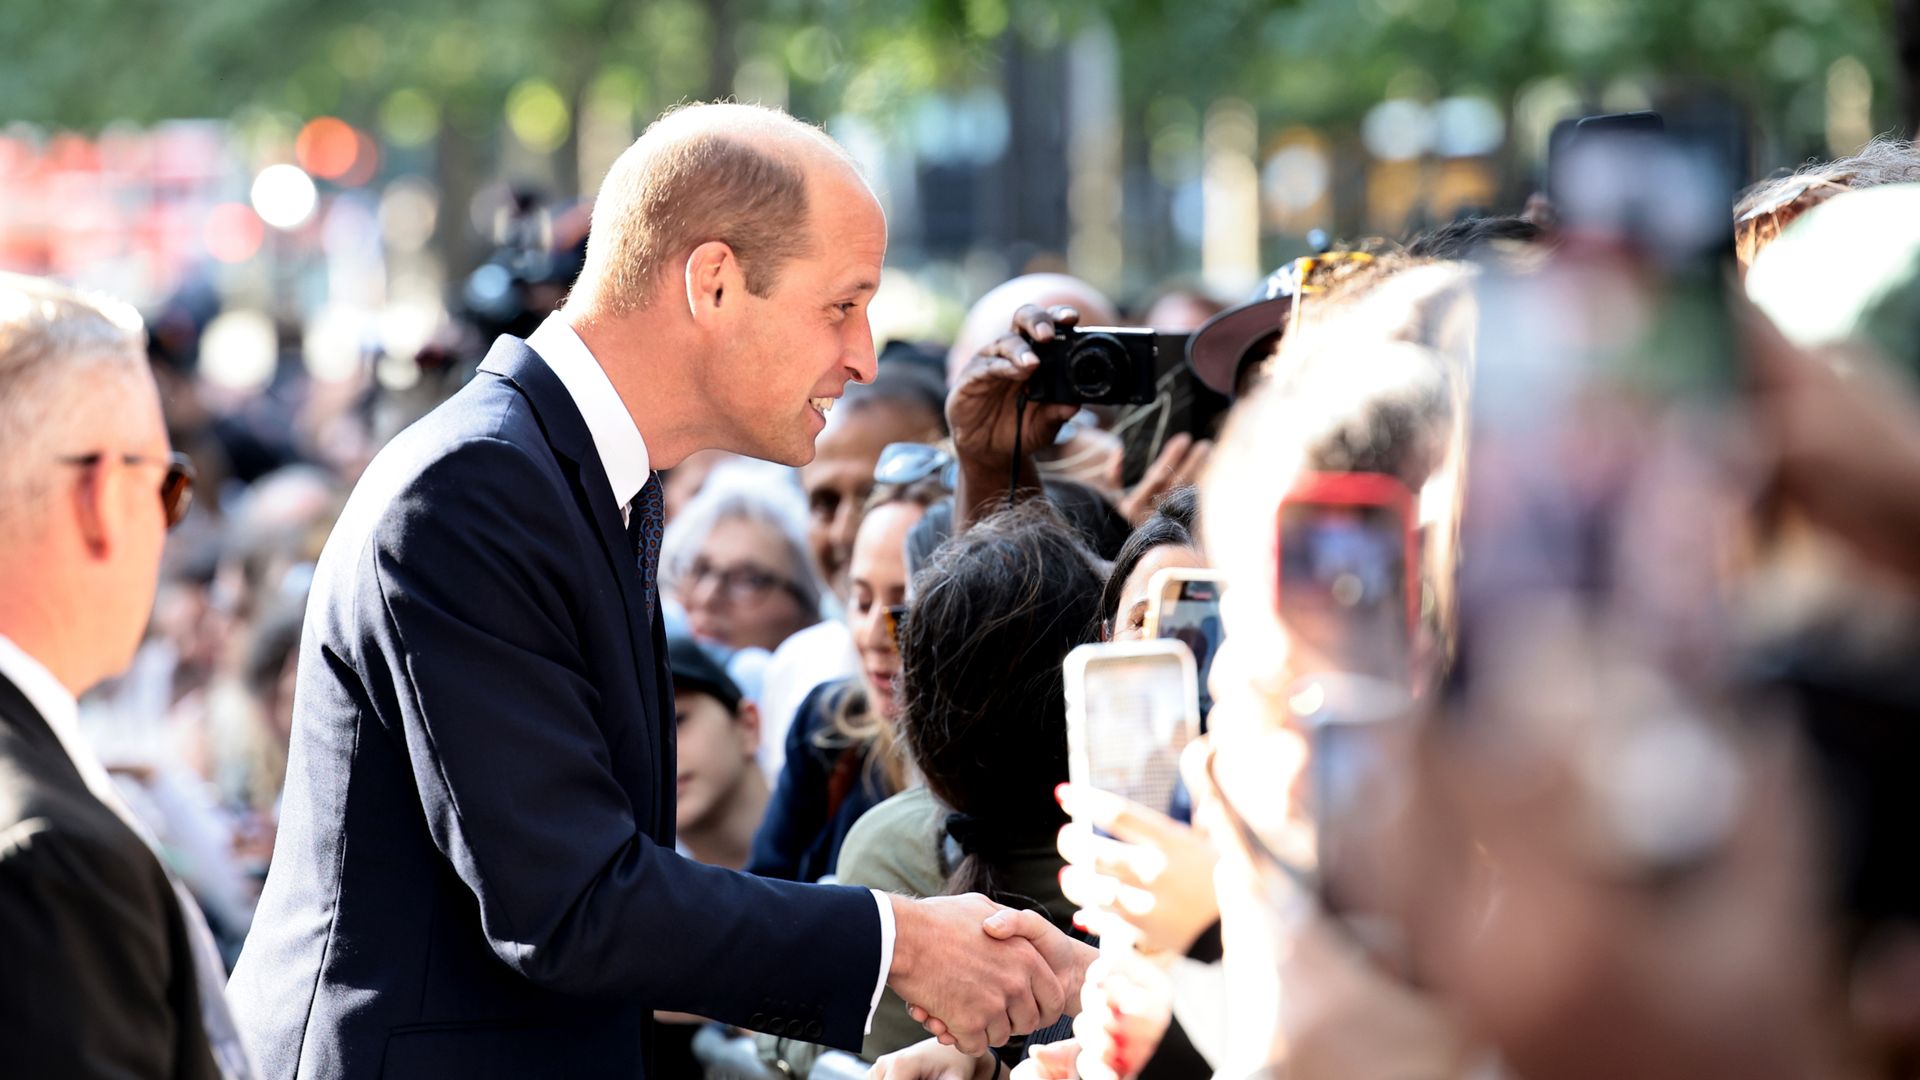 William greets members of the public in New York